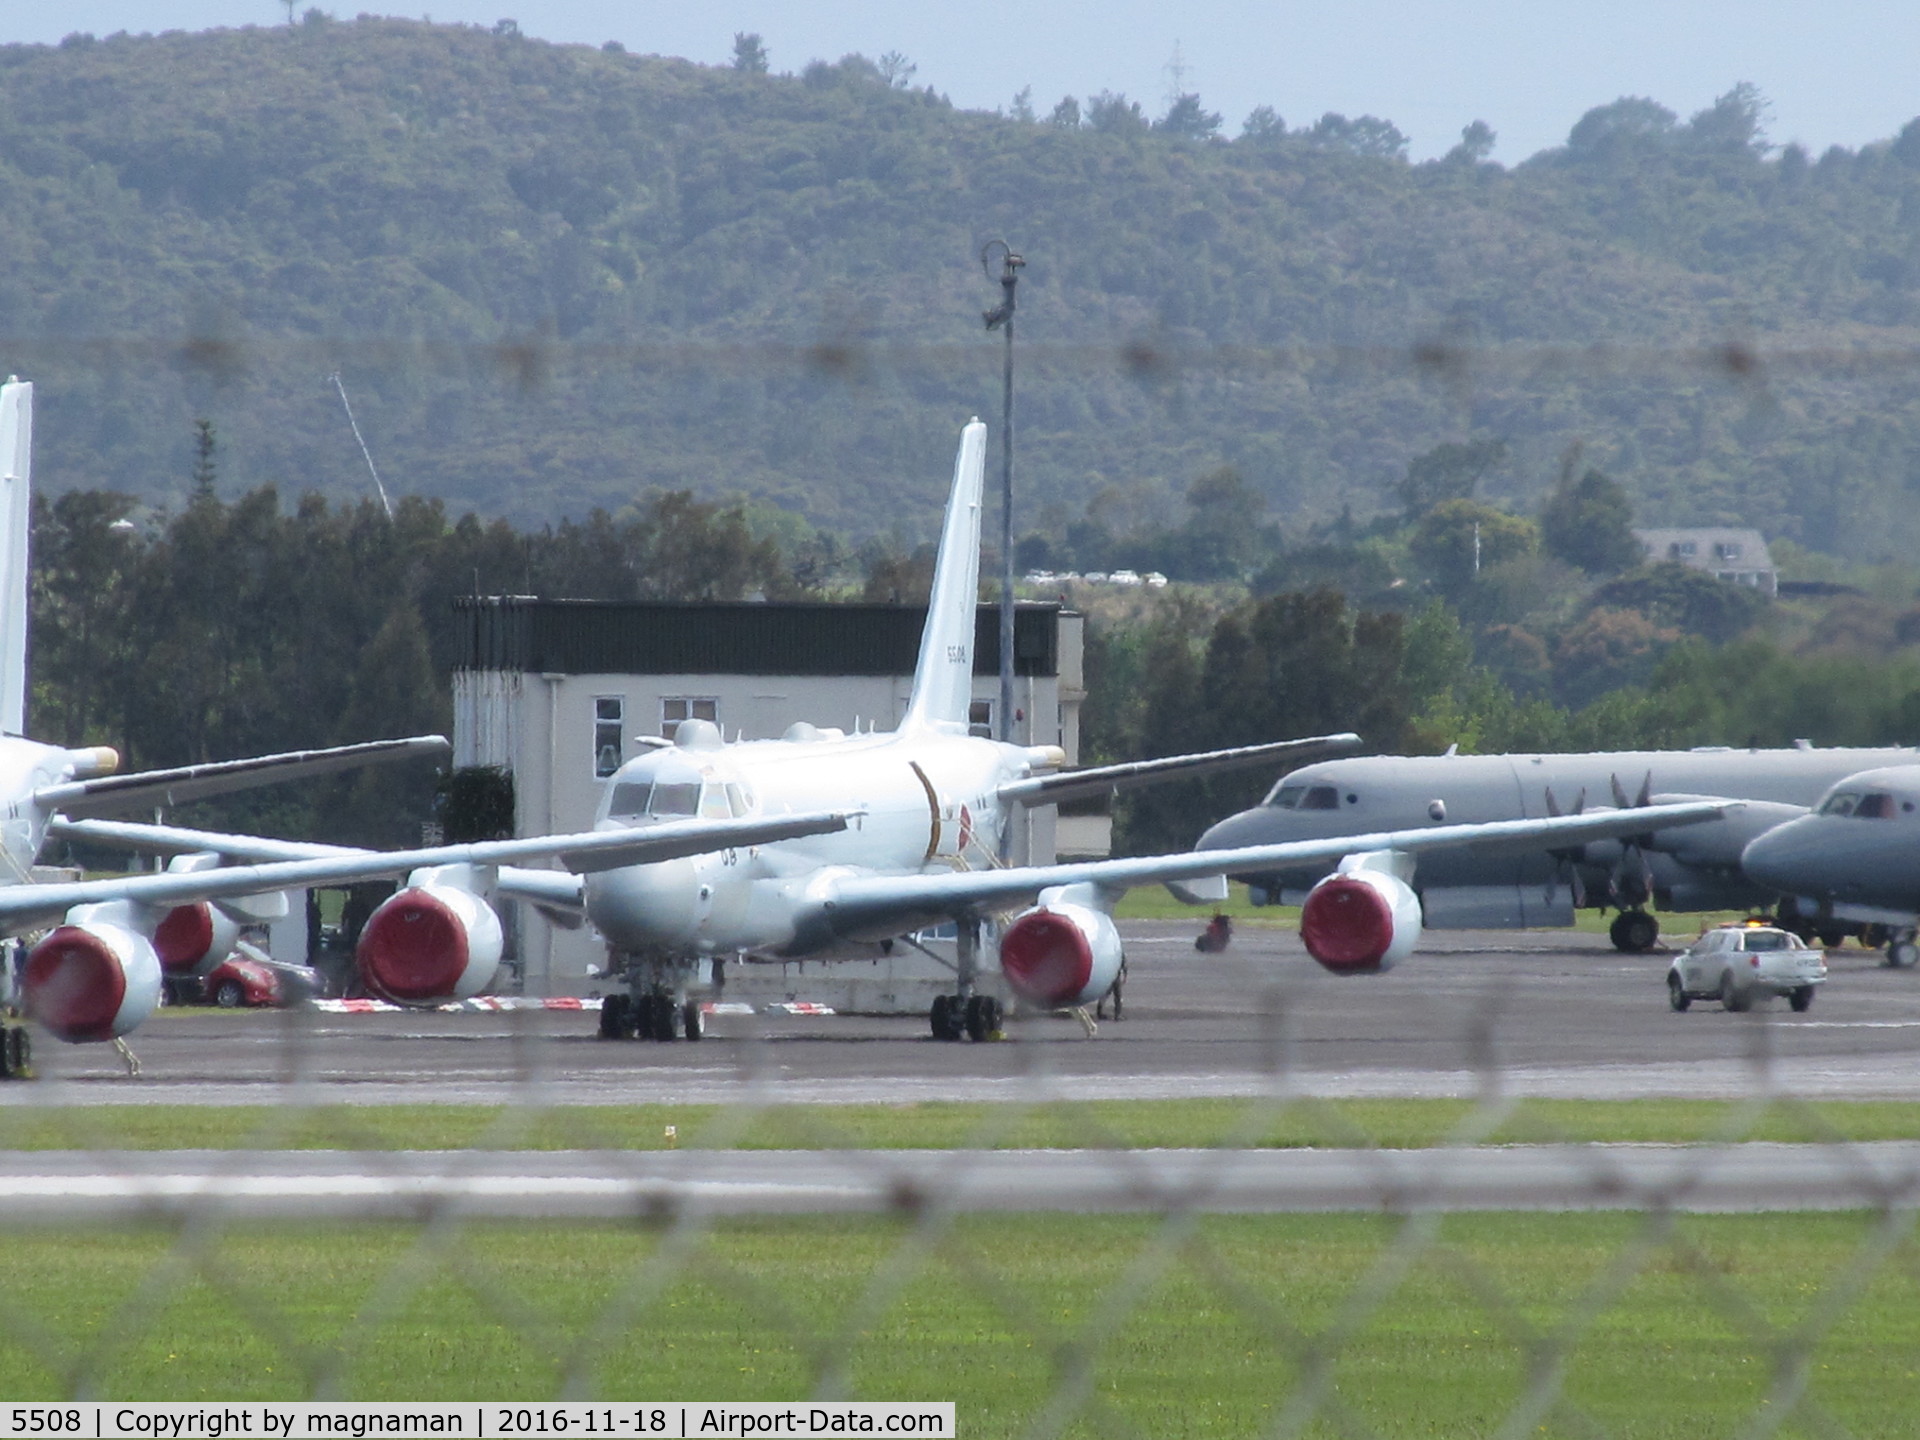 5508, 2014 Kawasaki P-1 C/N 8, Just about got through fence - 5505 in foreground.
At Whenuapai